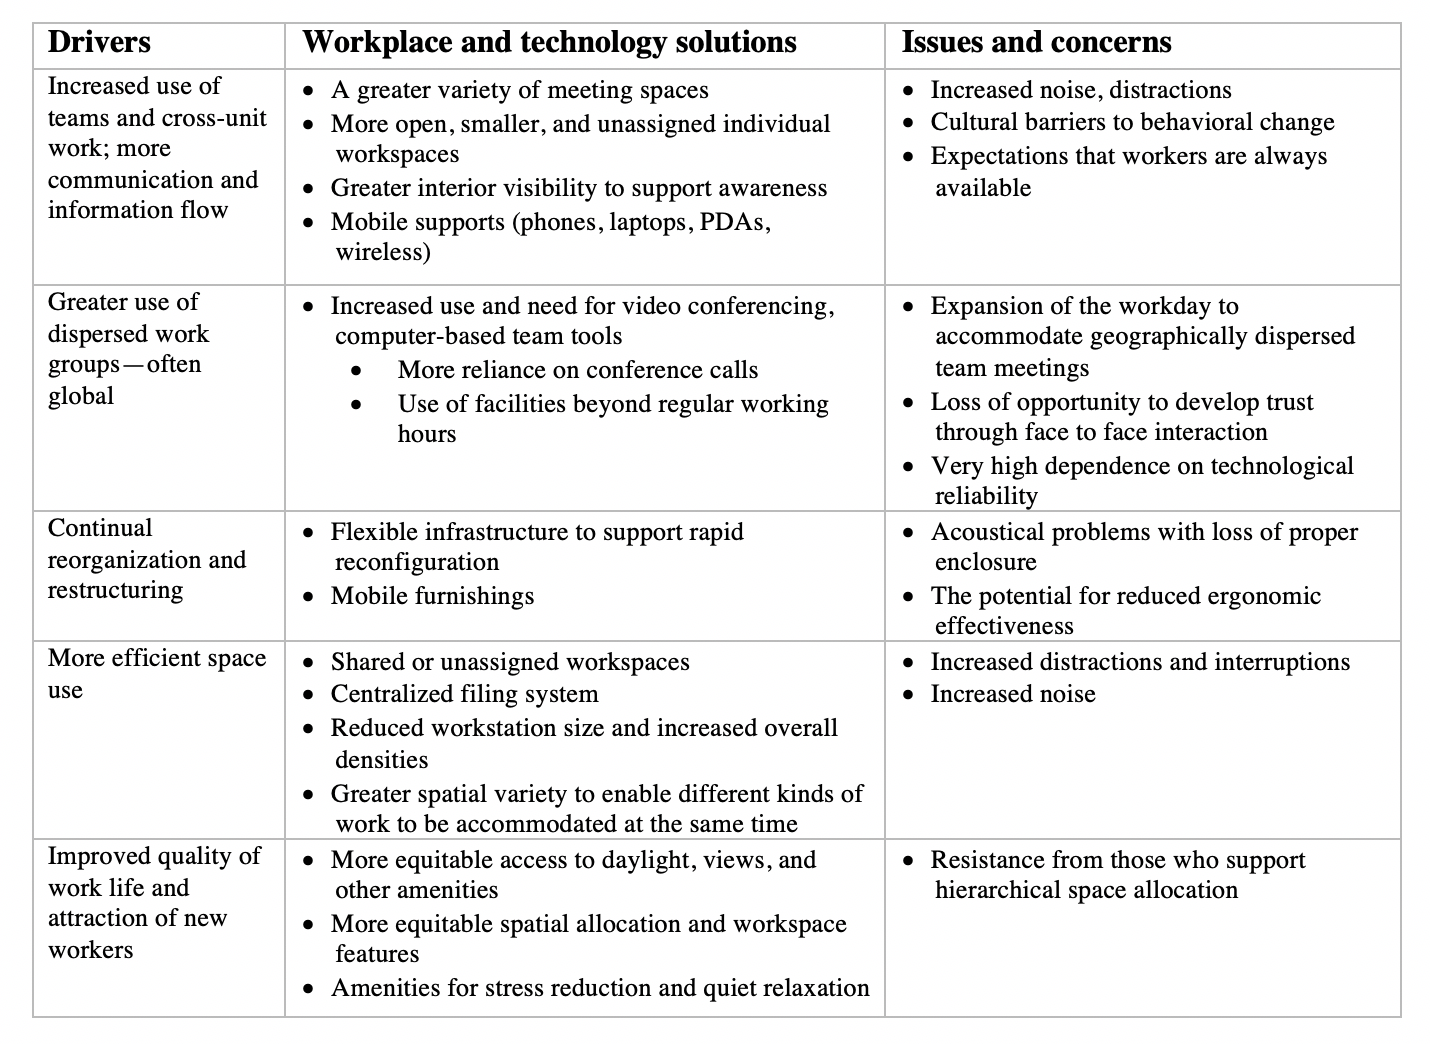 Table 1. Drivers, Solutions, and Issues for the Changing Workplace (Adapted from Whole Building Design Guide – The Changing Nature of Organizations, Work, and Workplace) [7]